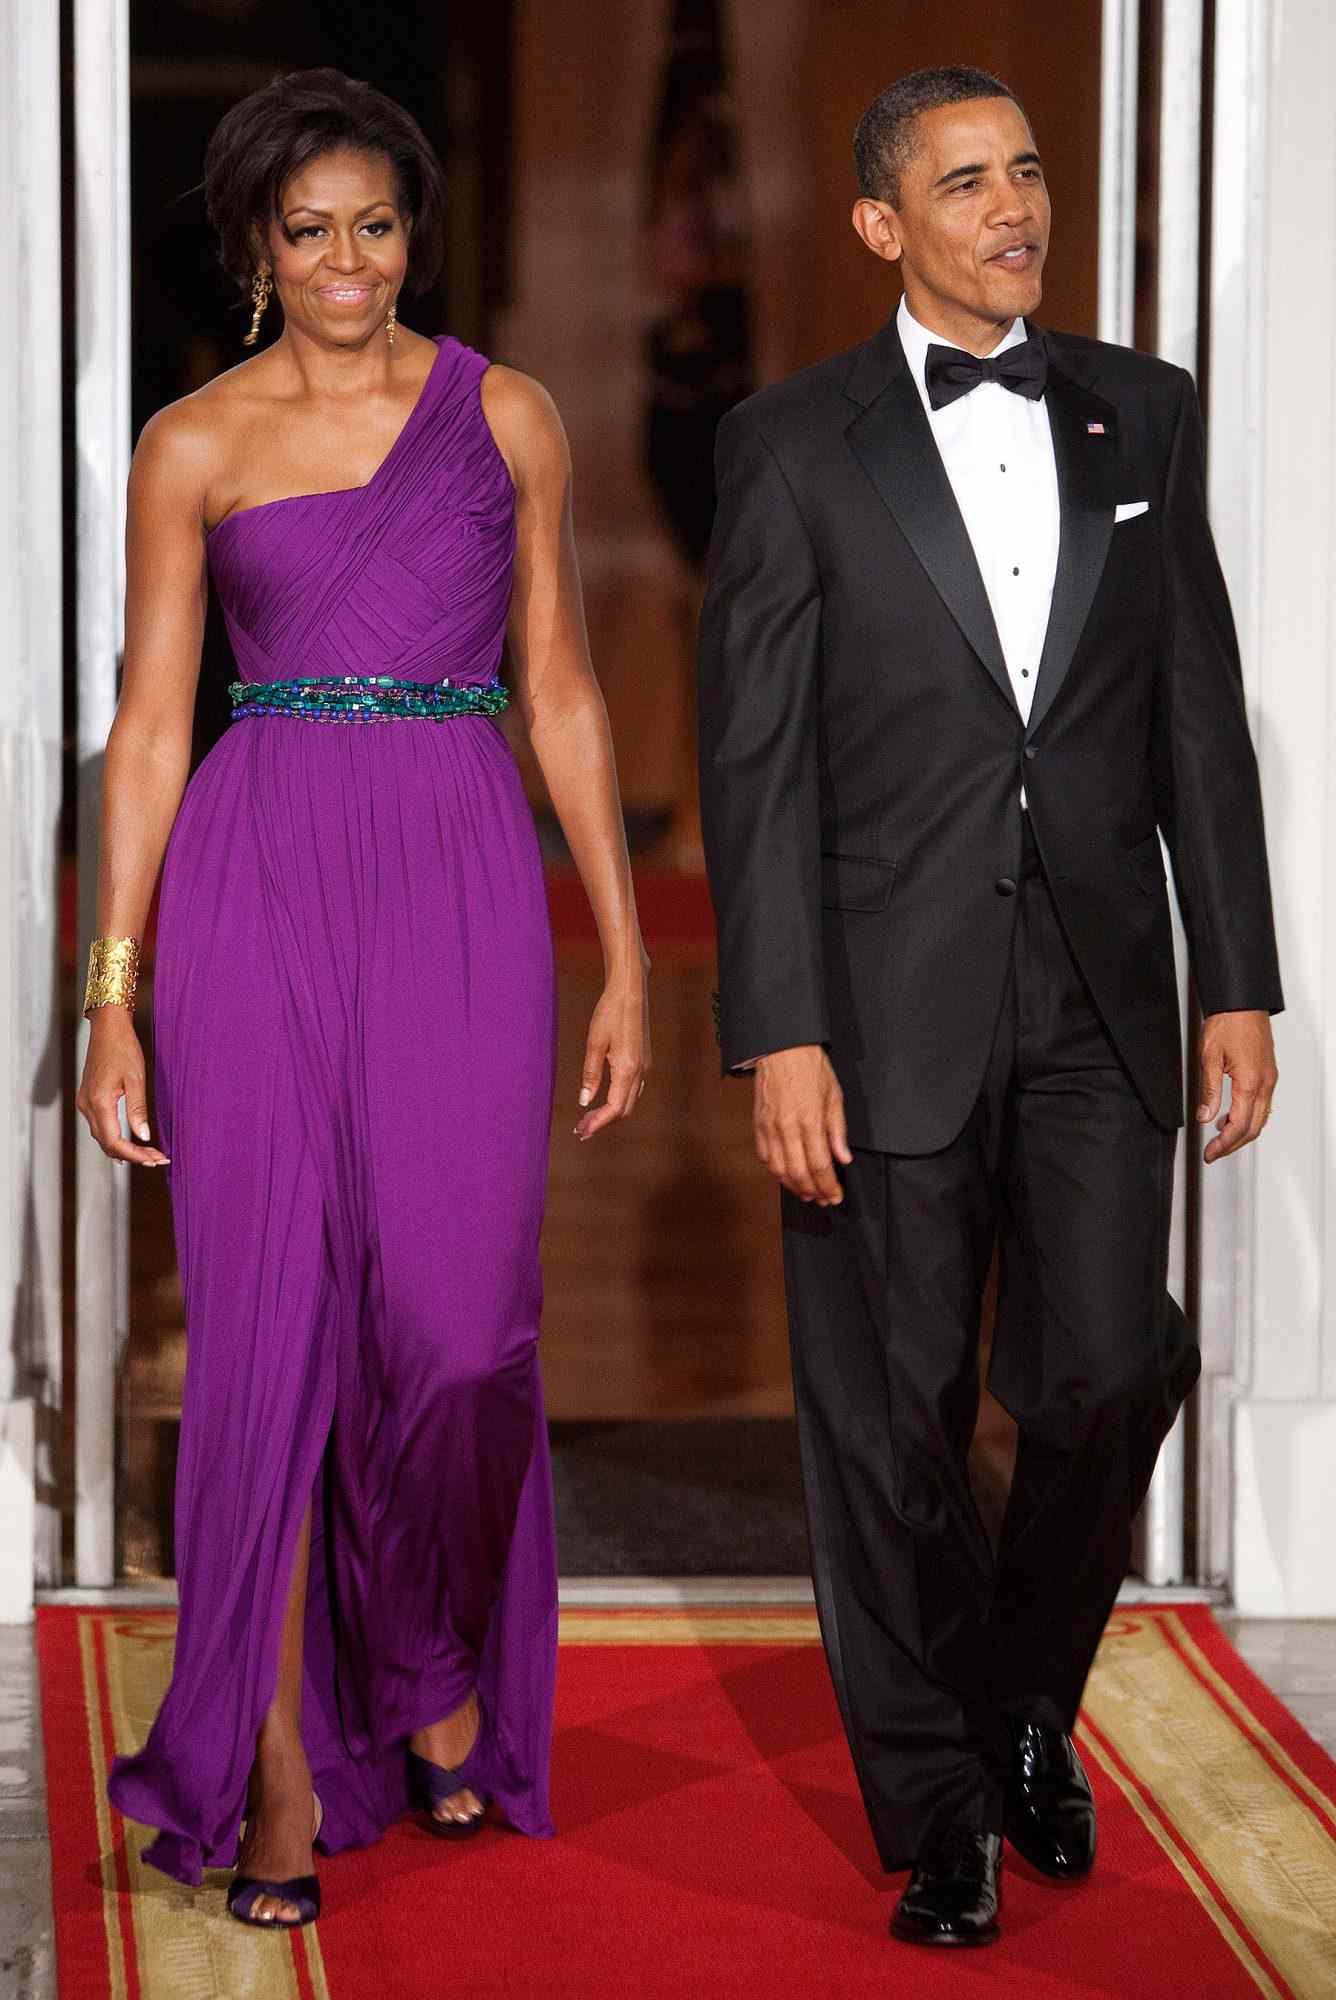 President Obama And Michelle Obama Welcome President And First Lady Kim To The State Dinner